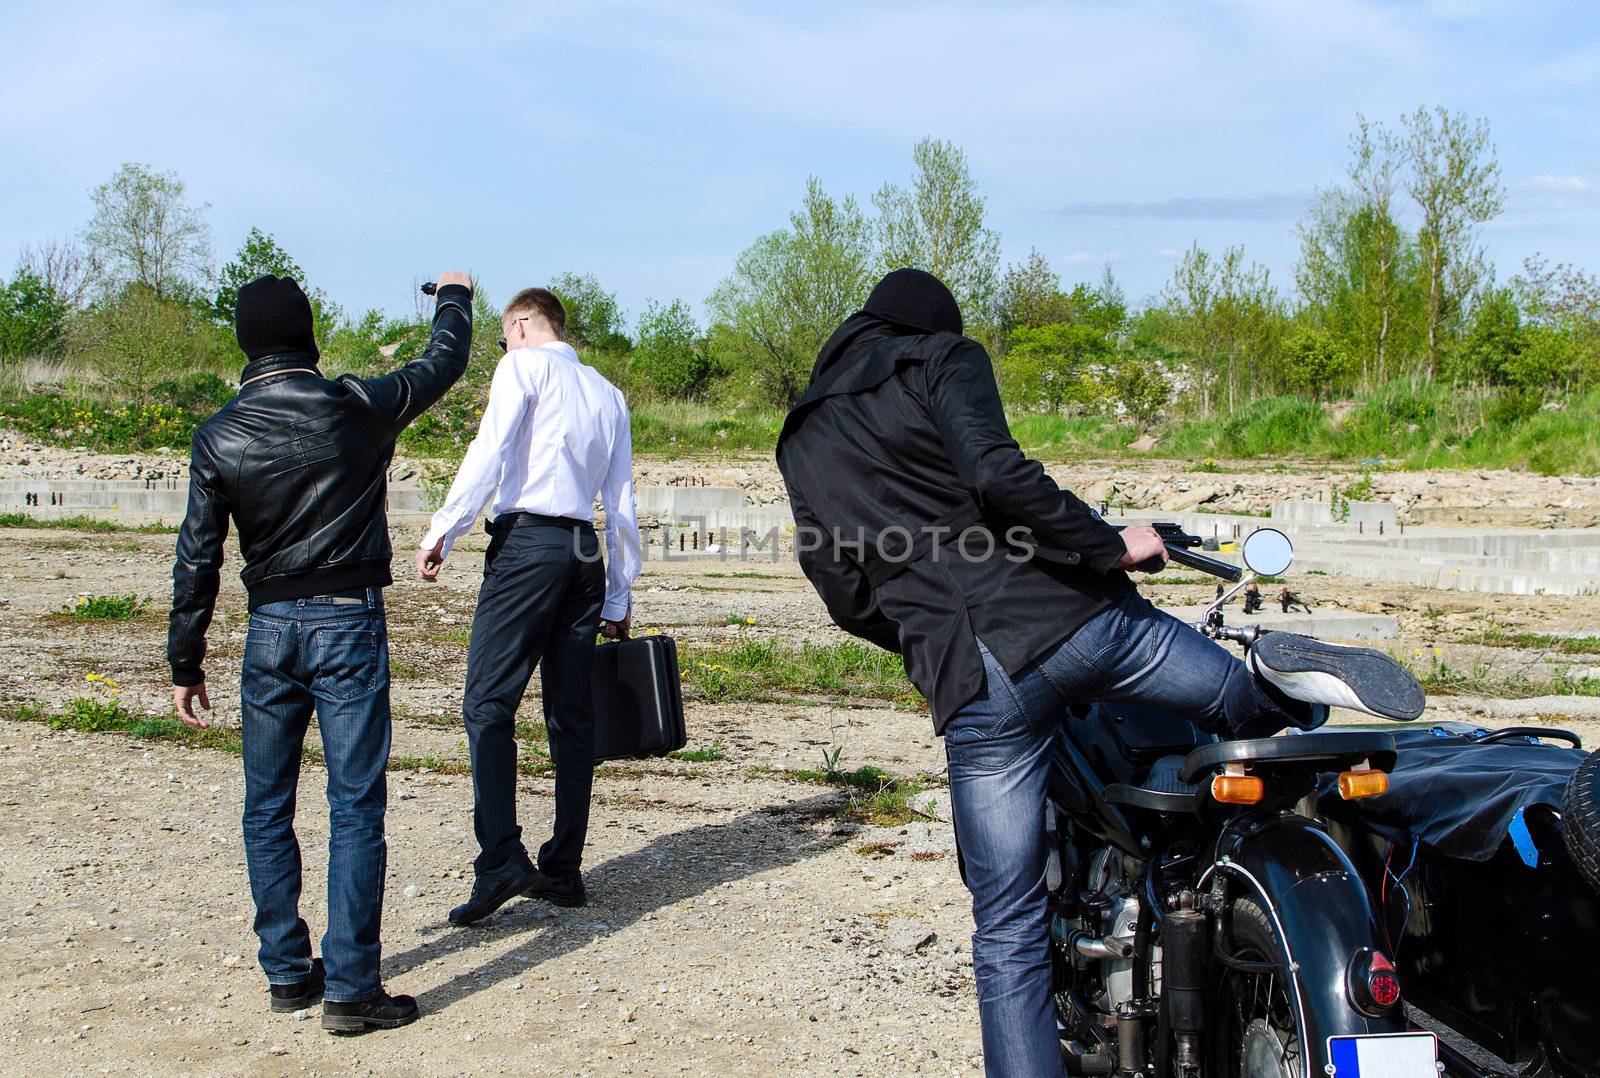 Two bandits kidnapped a businessman with a suitcase by dmitrimaruta